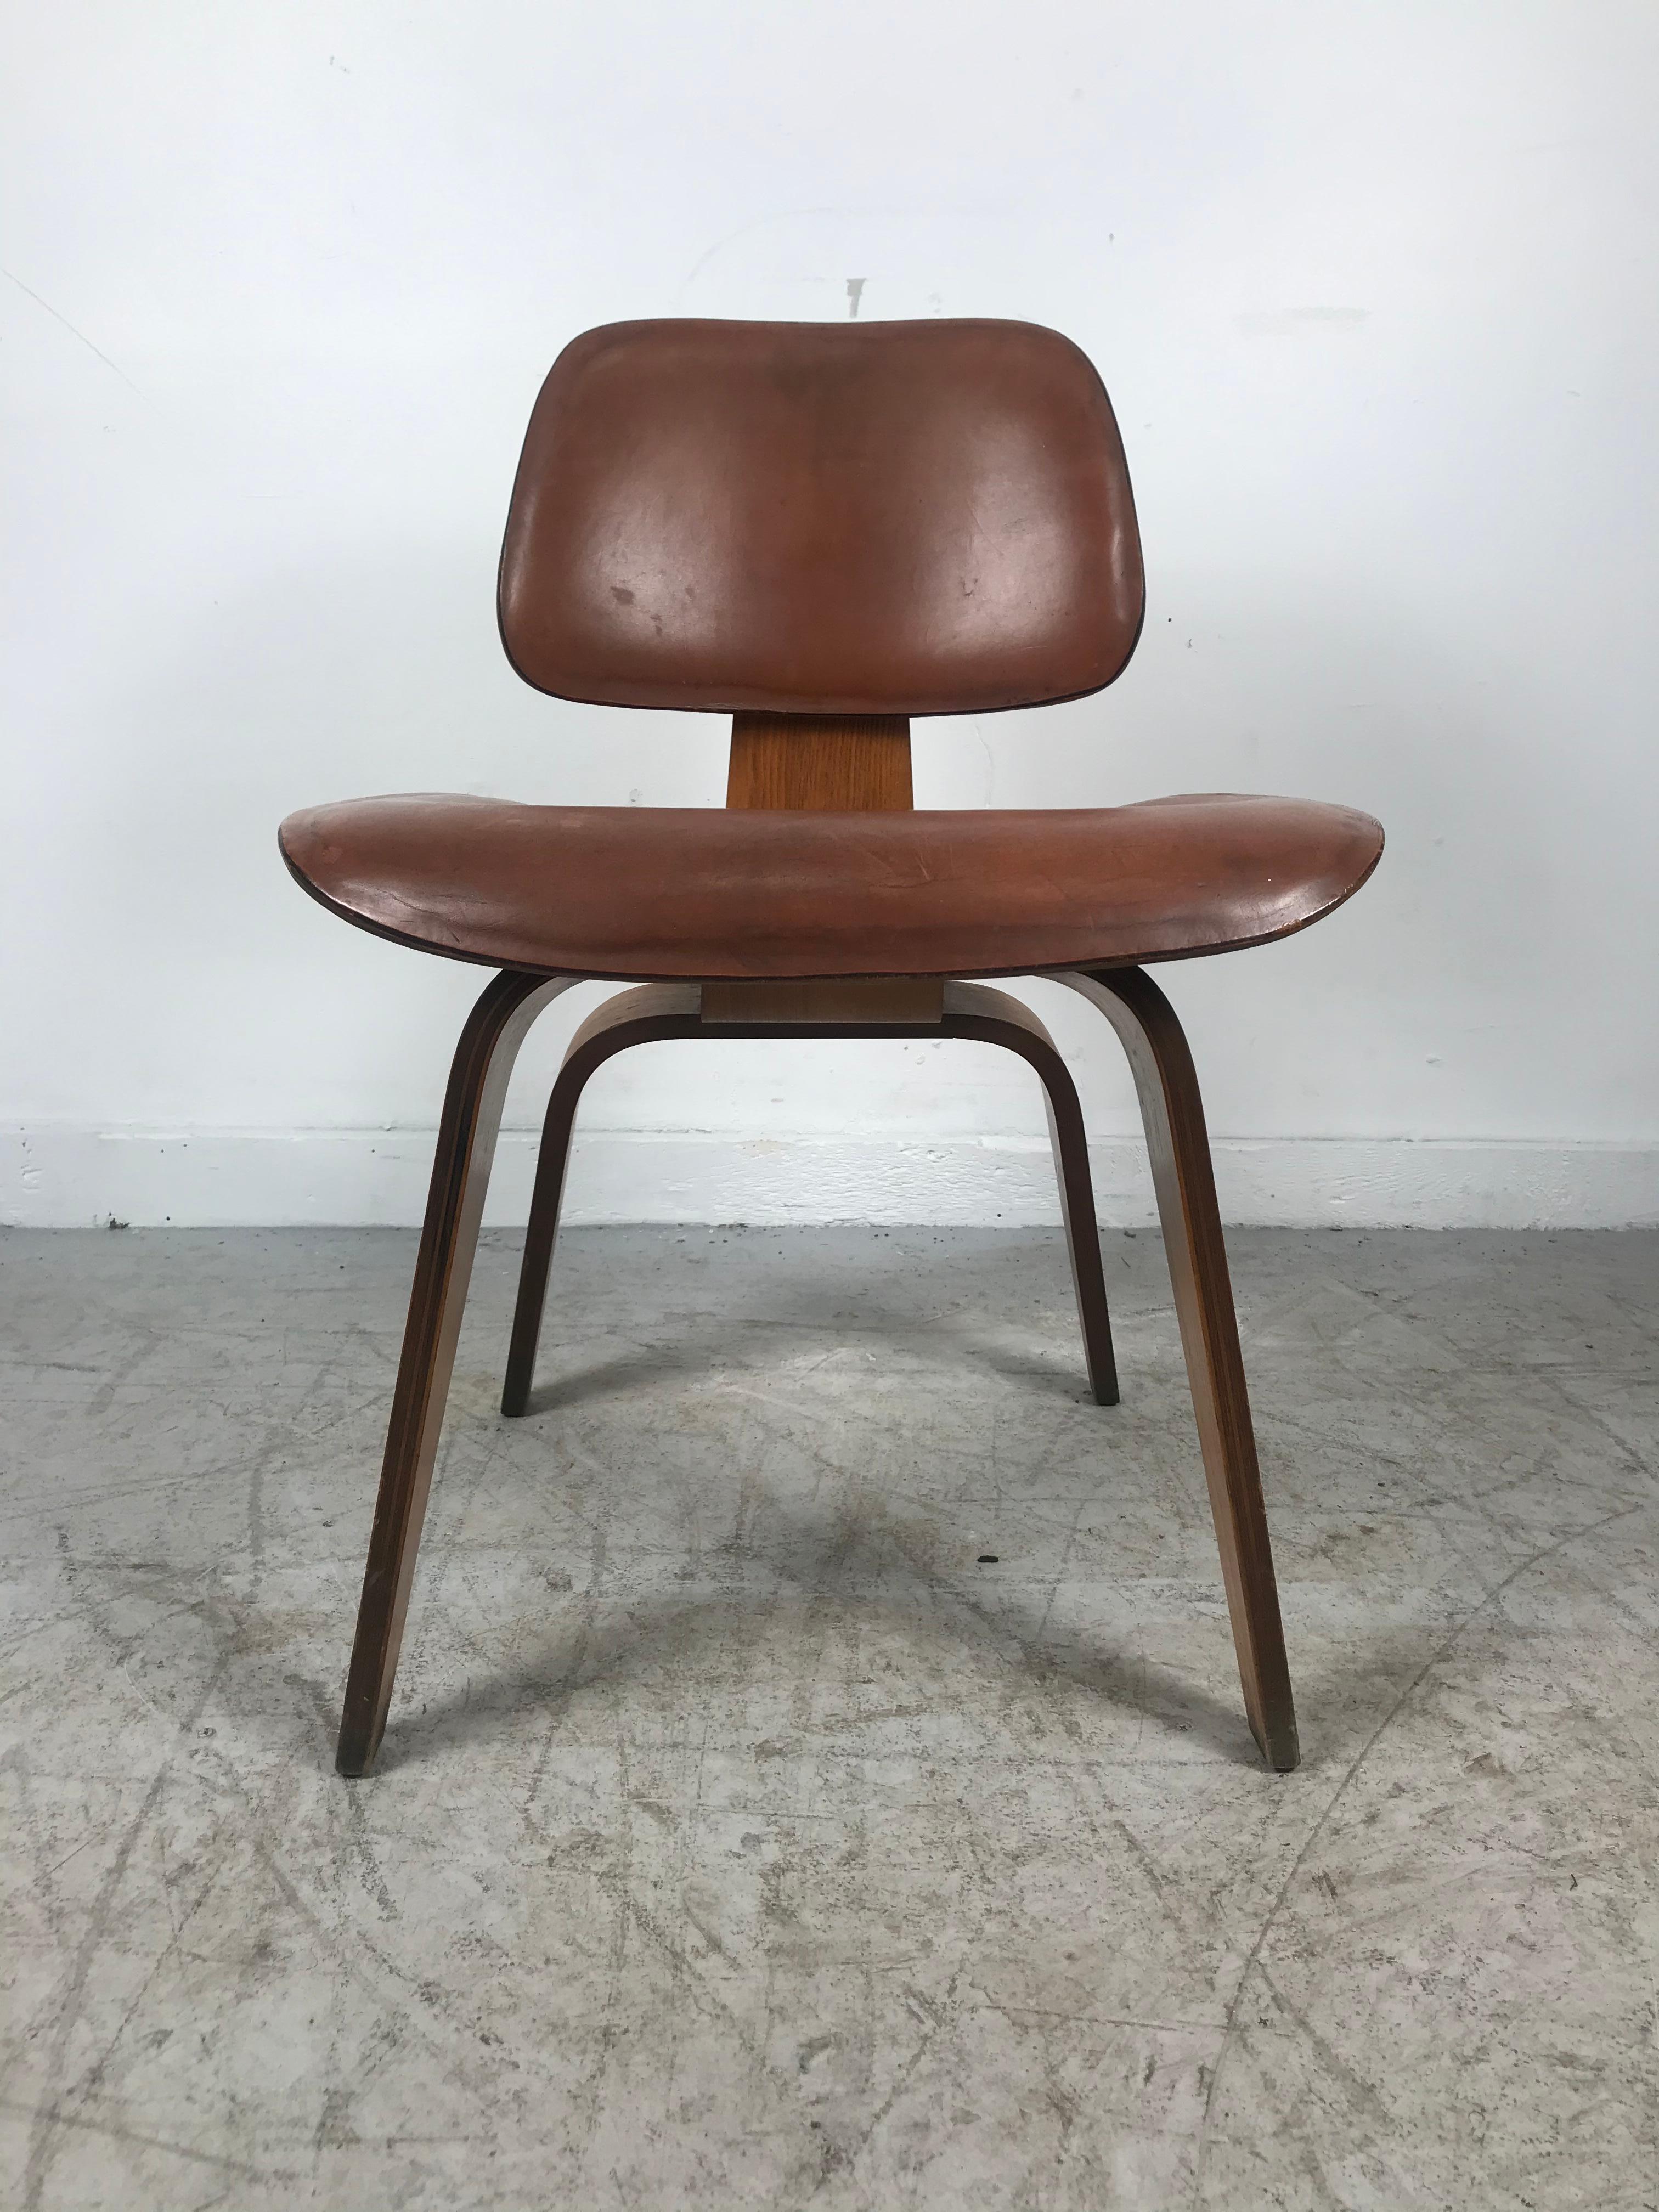 Beautiful and extremely rare DCW, dining chair wood designed by Charles & Ray Eames, art, sculpture. The chair is made of walnut with its original leather seat and back. Amazing patina. Very early production manufactured by Evans Products, late